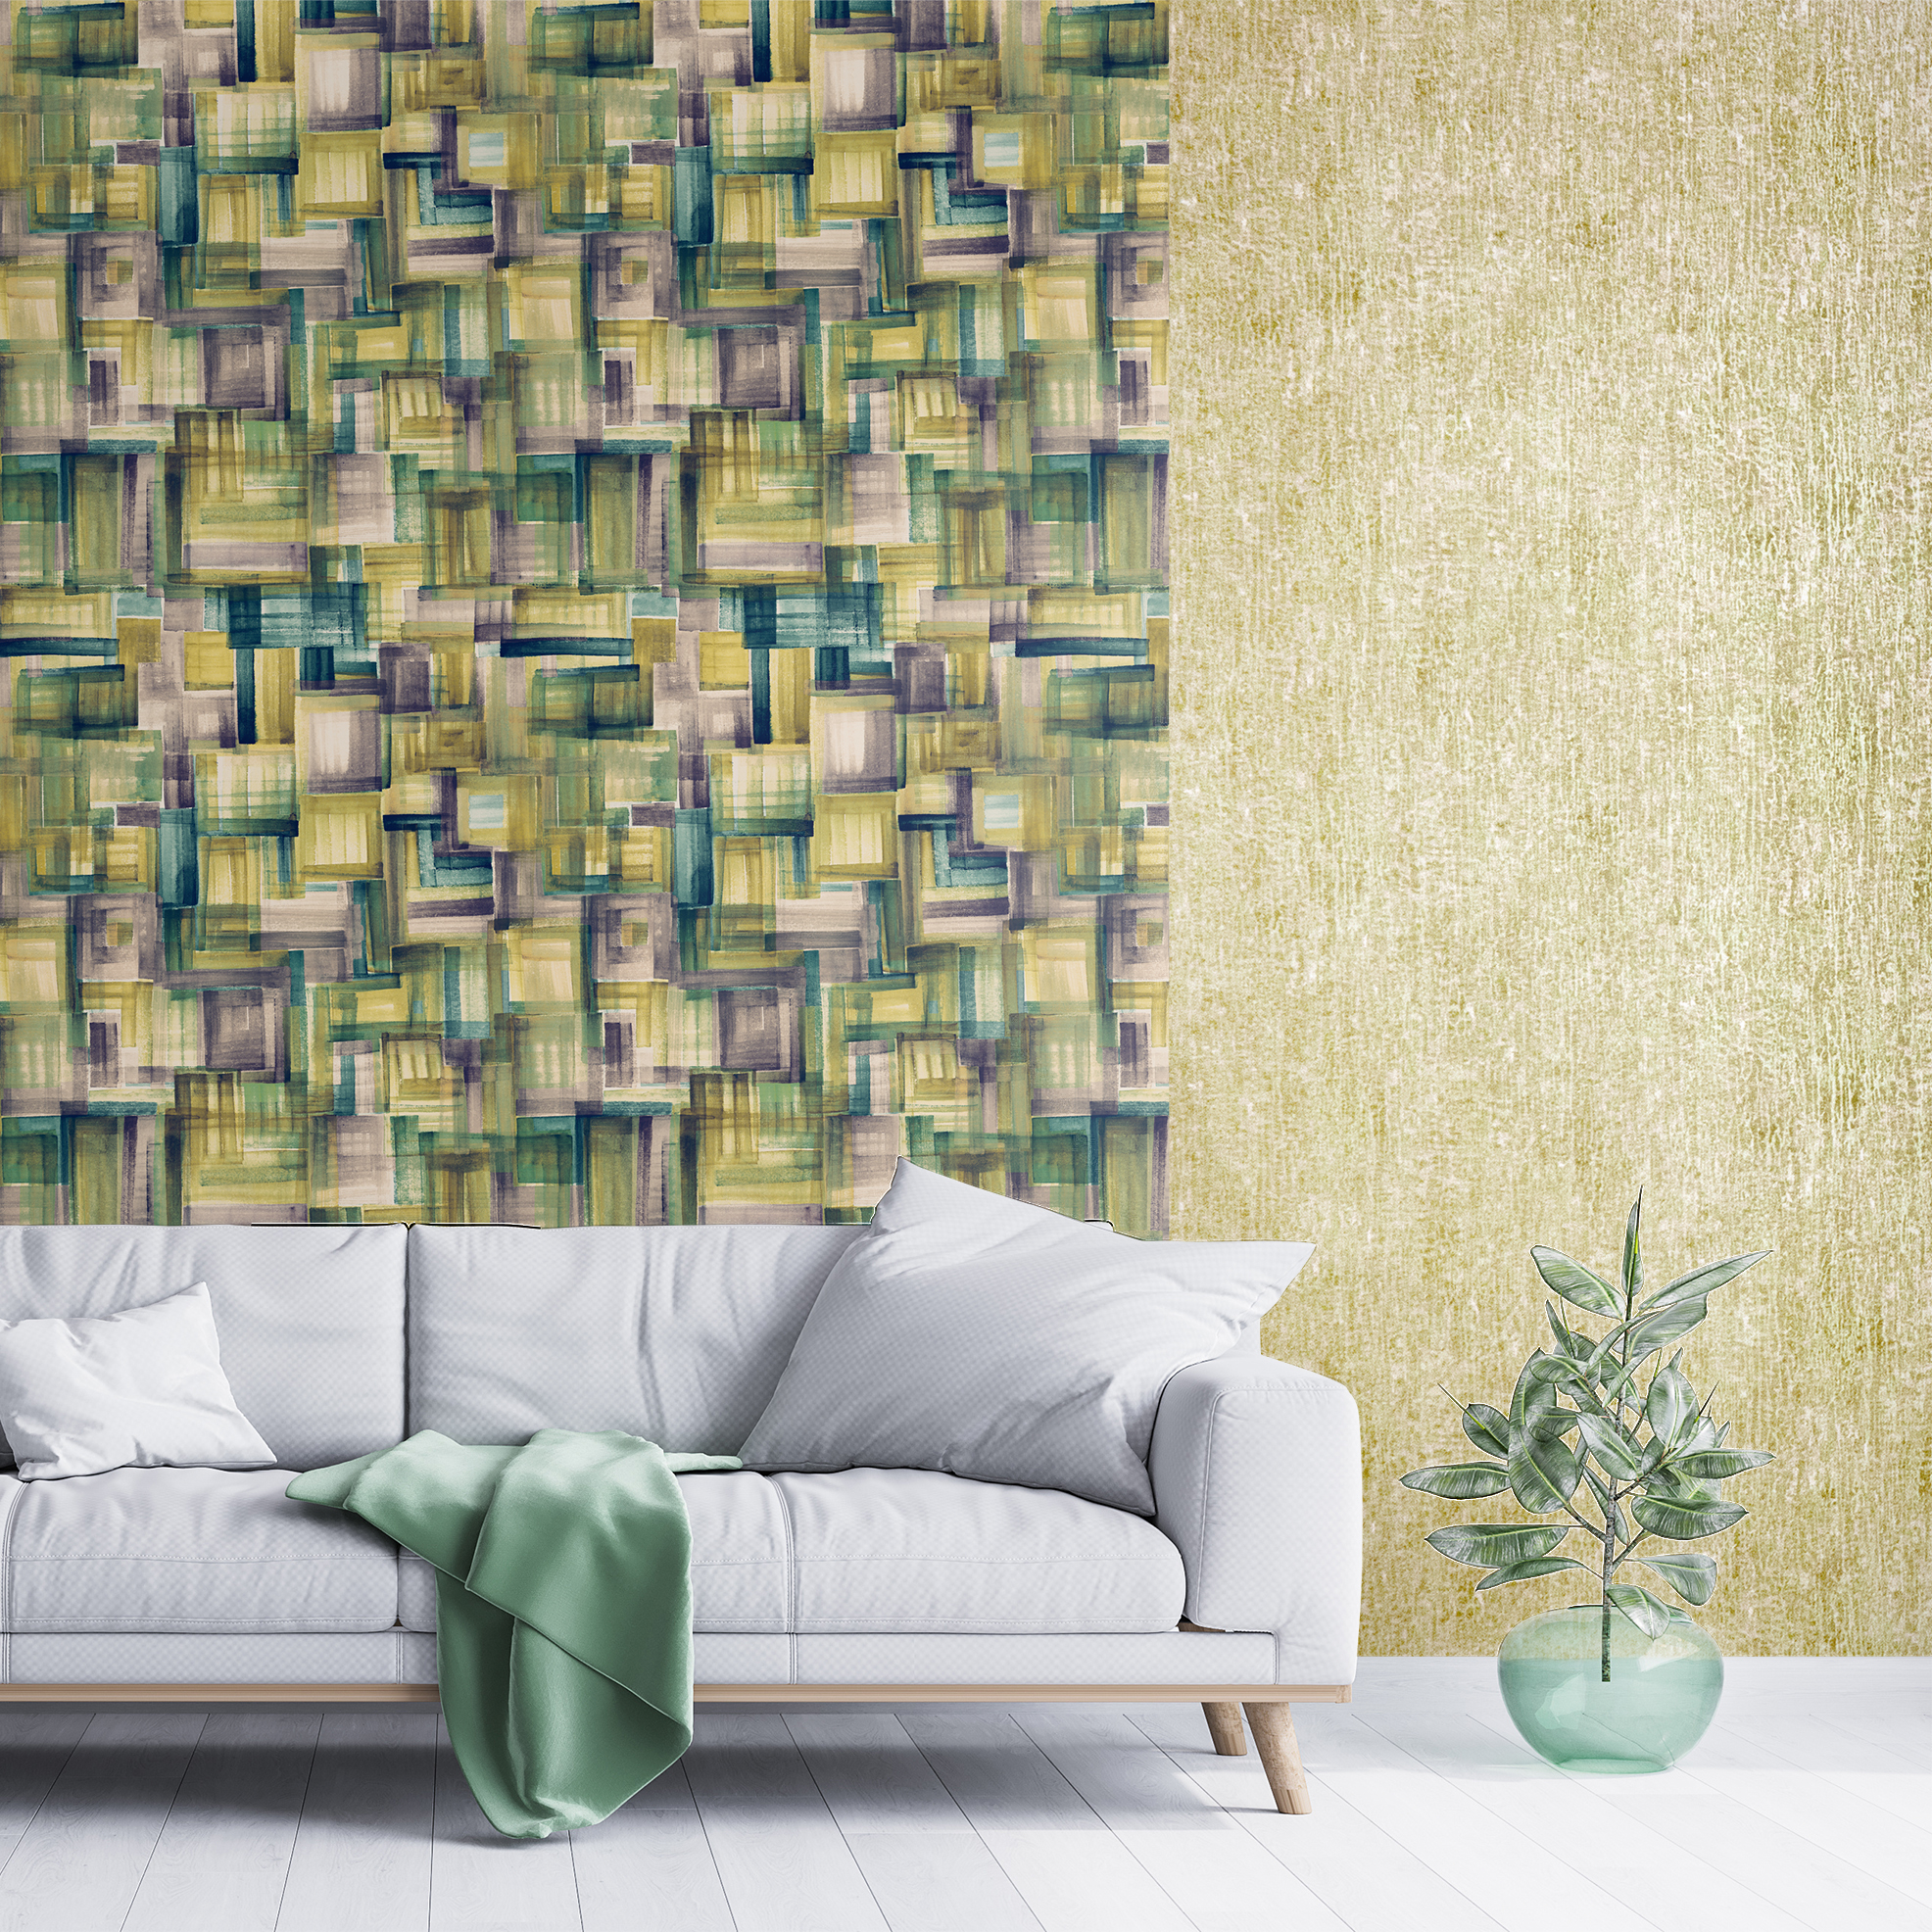 Plain wallpaper with a refined structure | Hohenberger